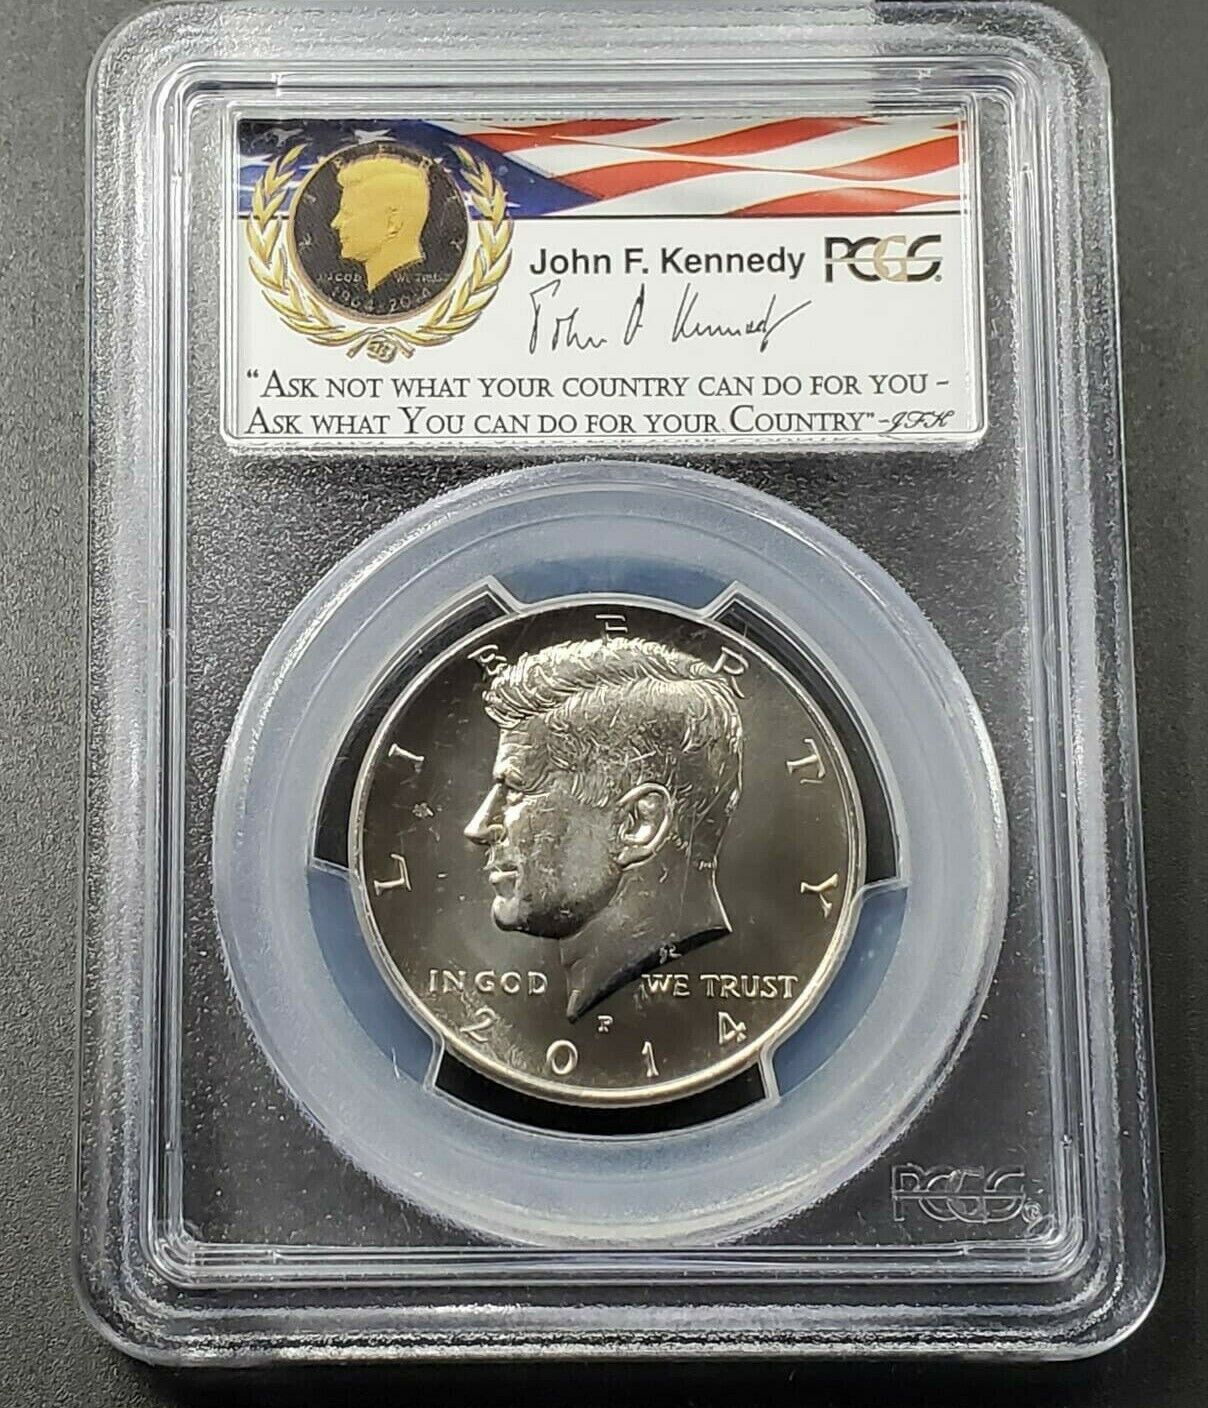 2014 P Kennedy Half Dollar PCGS SP68 50th Anniversary UNC First Day of Issue